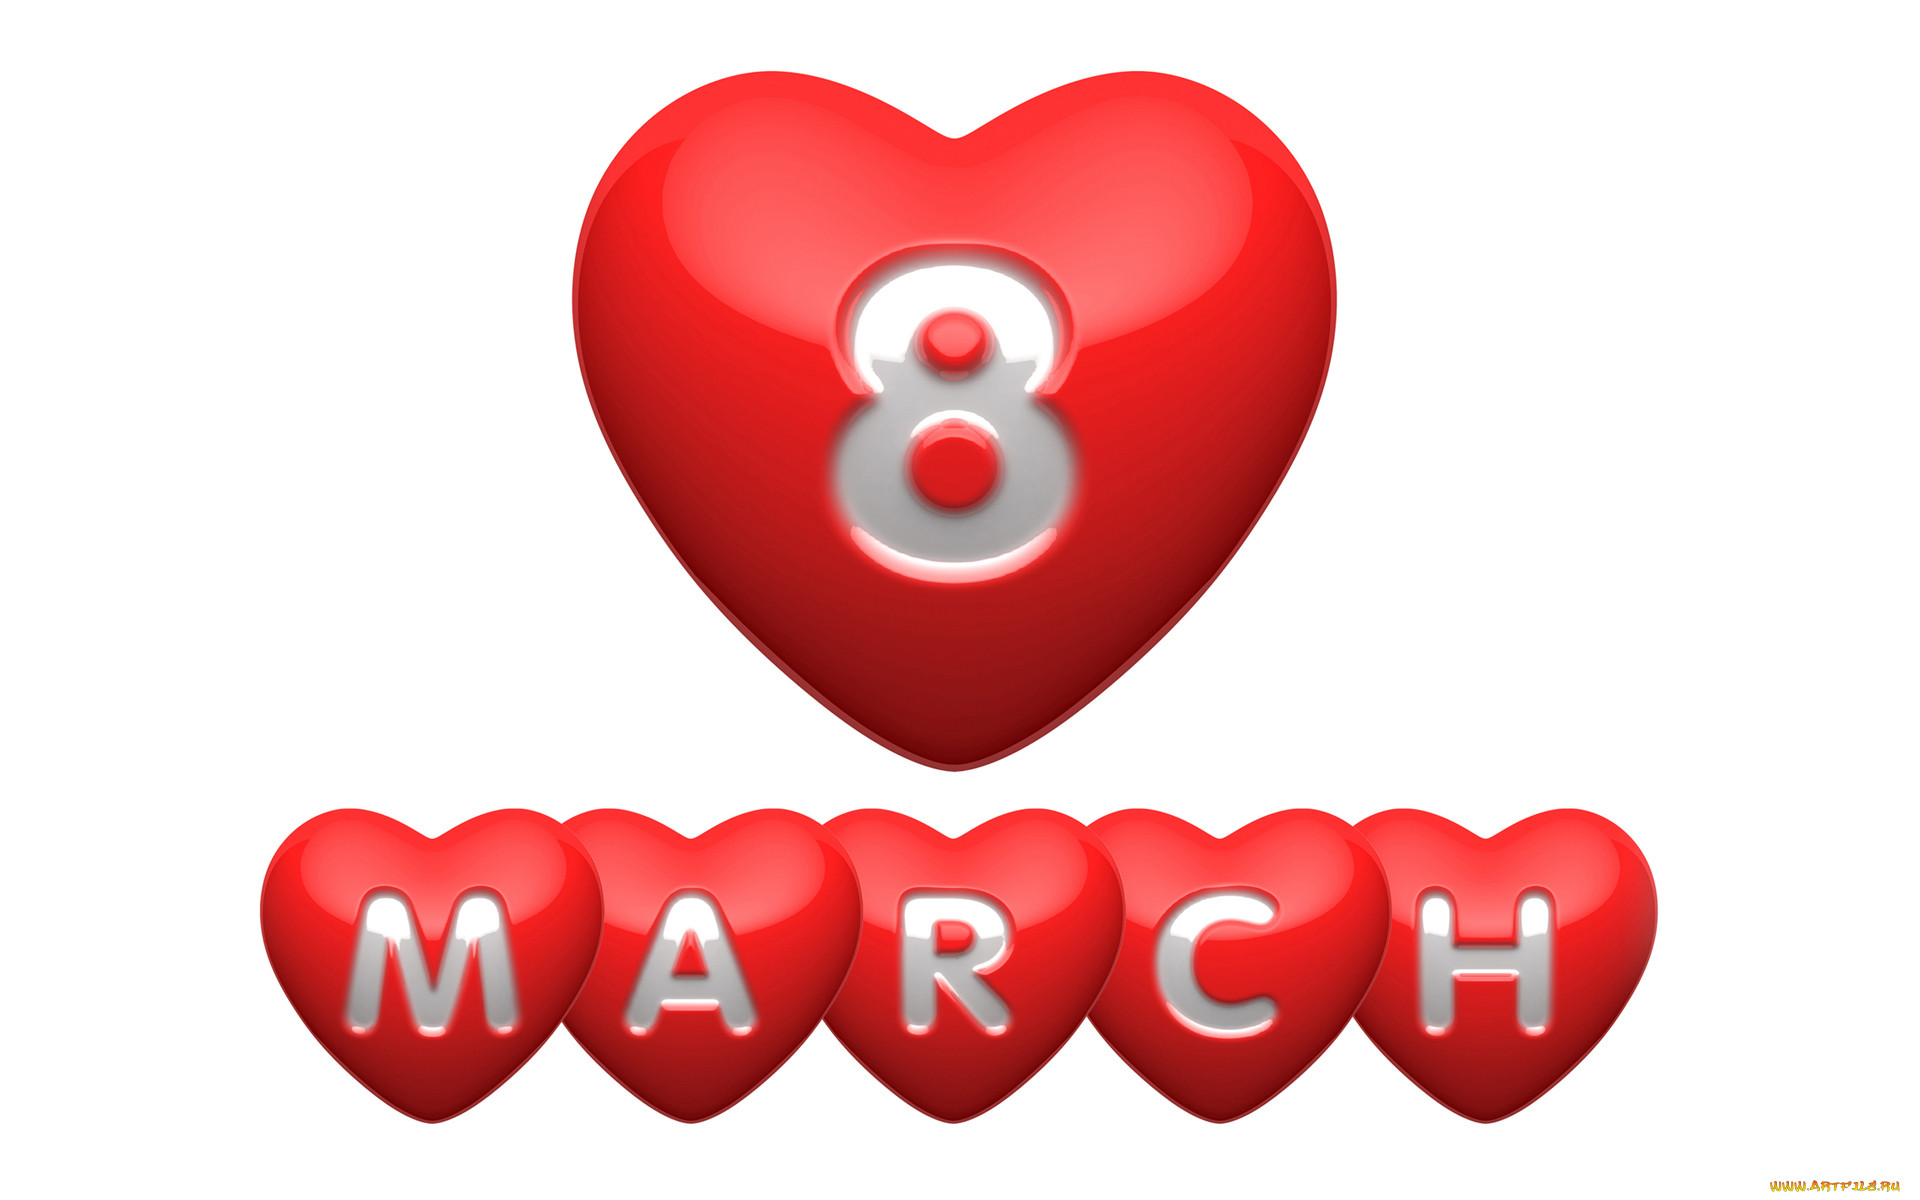 , , , , 8, march, , red, heart